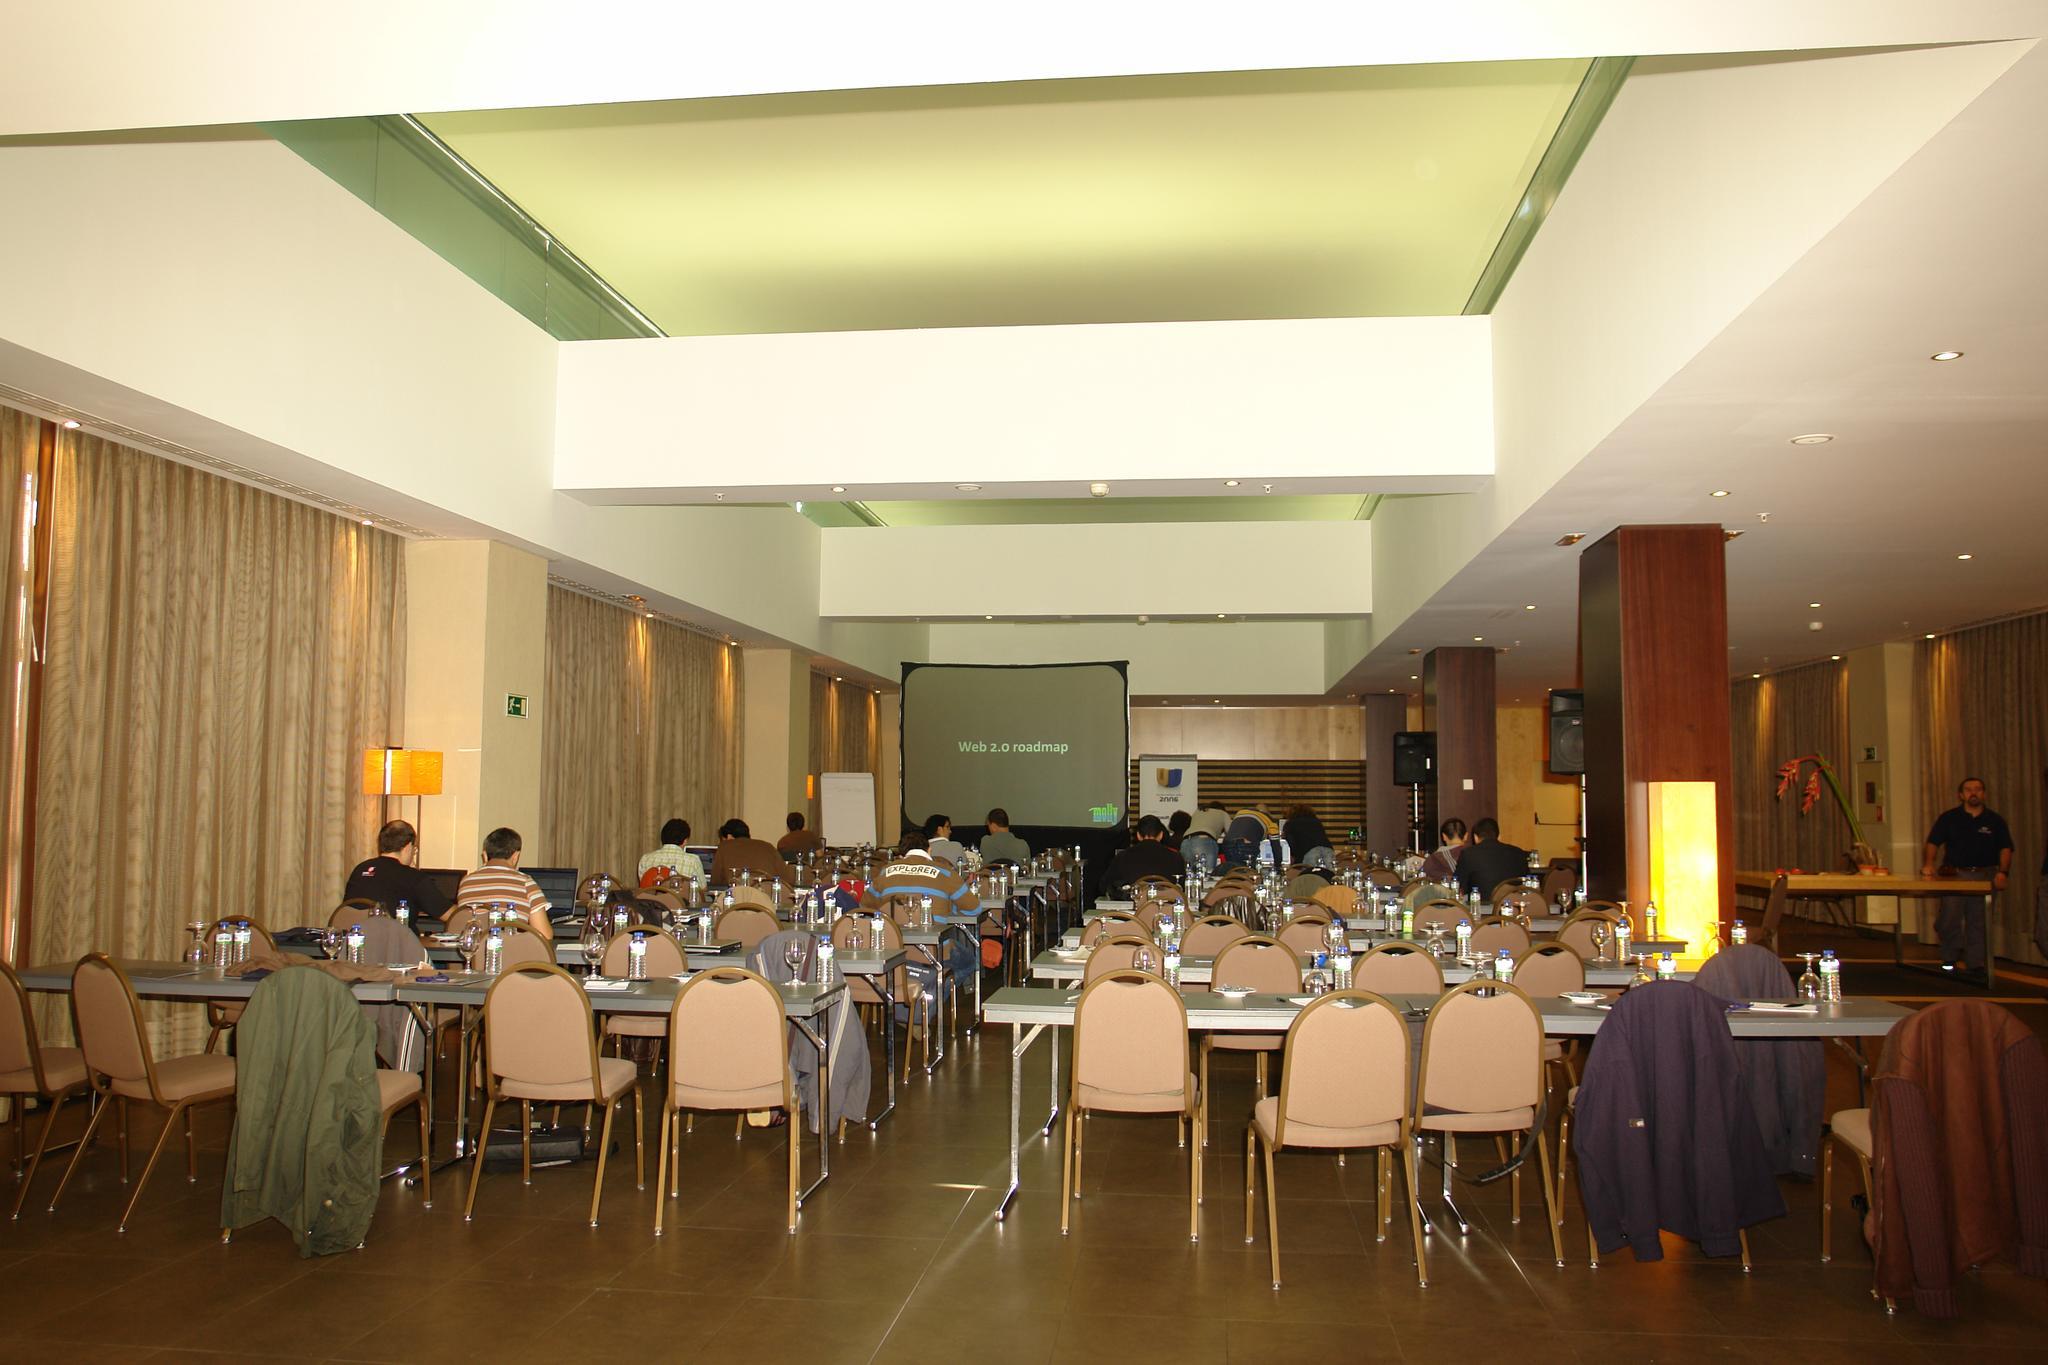 there are many people eating together at the large dining room